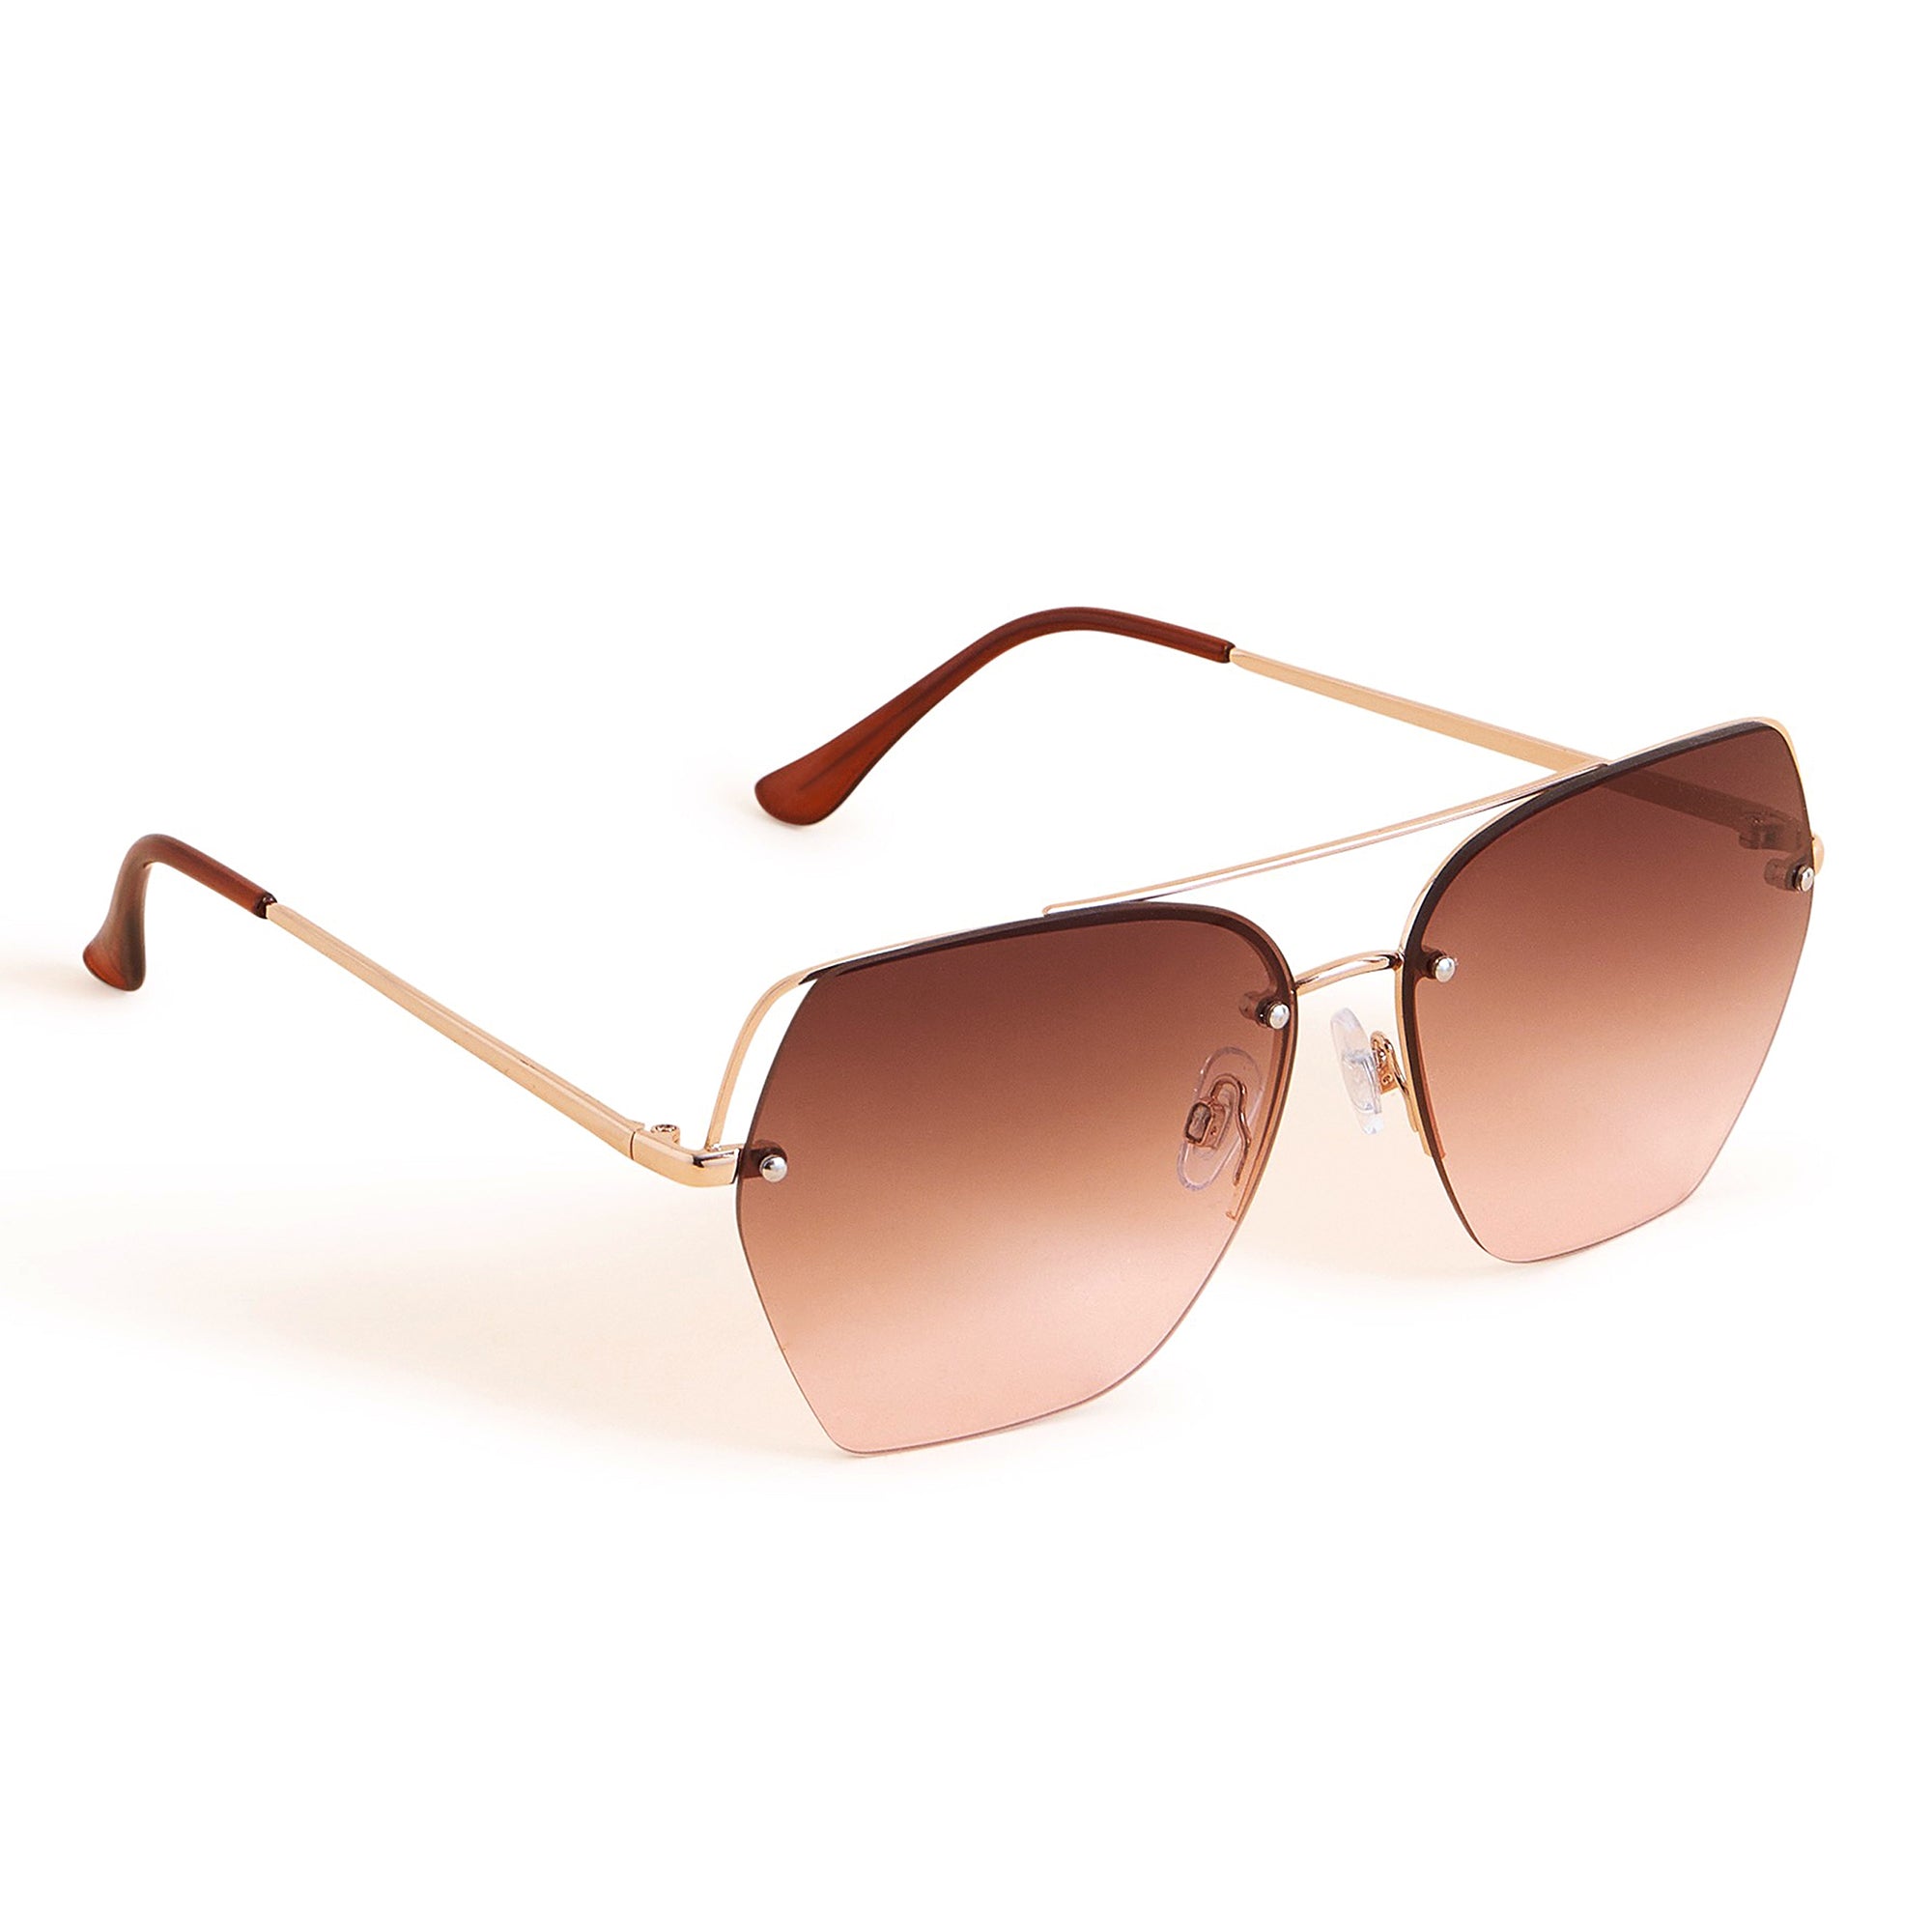 Buy Aviator Sunglasses Gold Metal Frame with Brown Lens Stylish Fashion at  Amazon.in